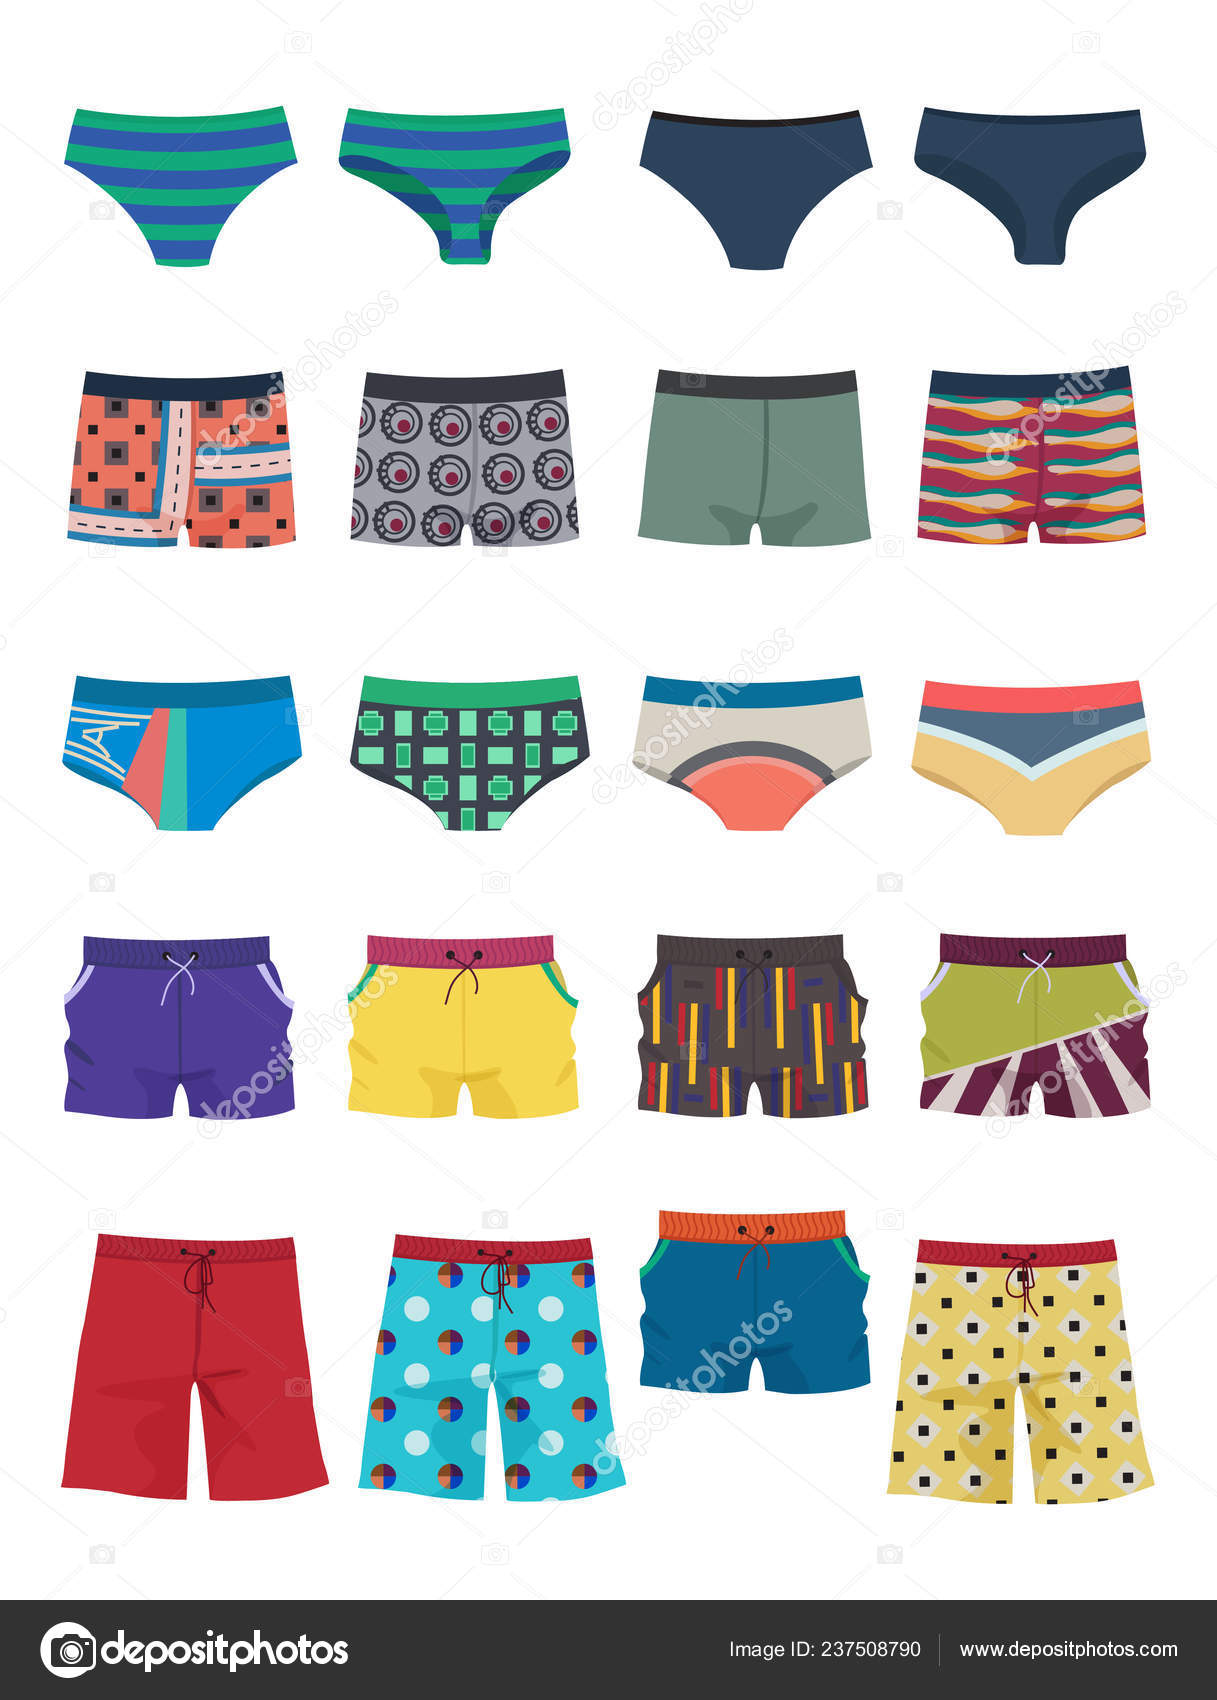 8 Skirt Shorts Underneath Images, Stock Photos, 3D objects, & Vectors